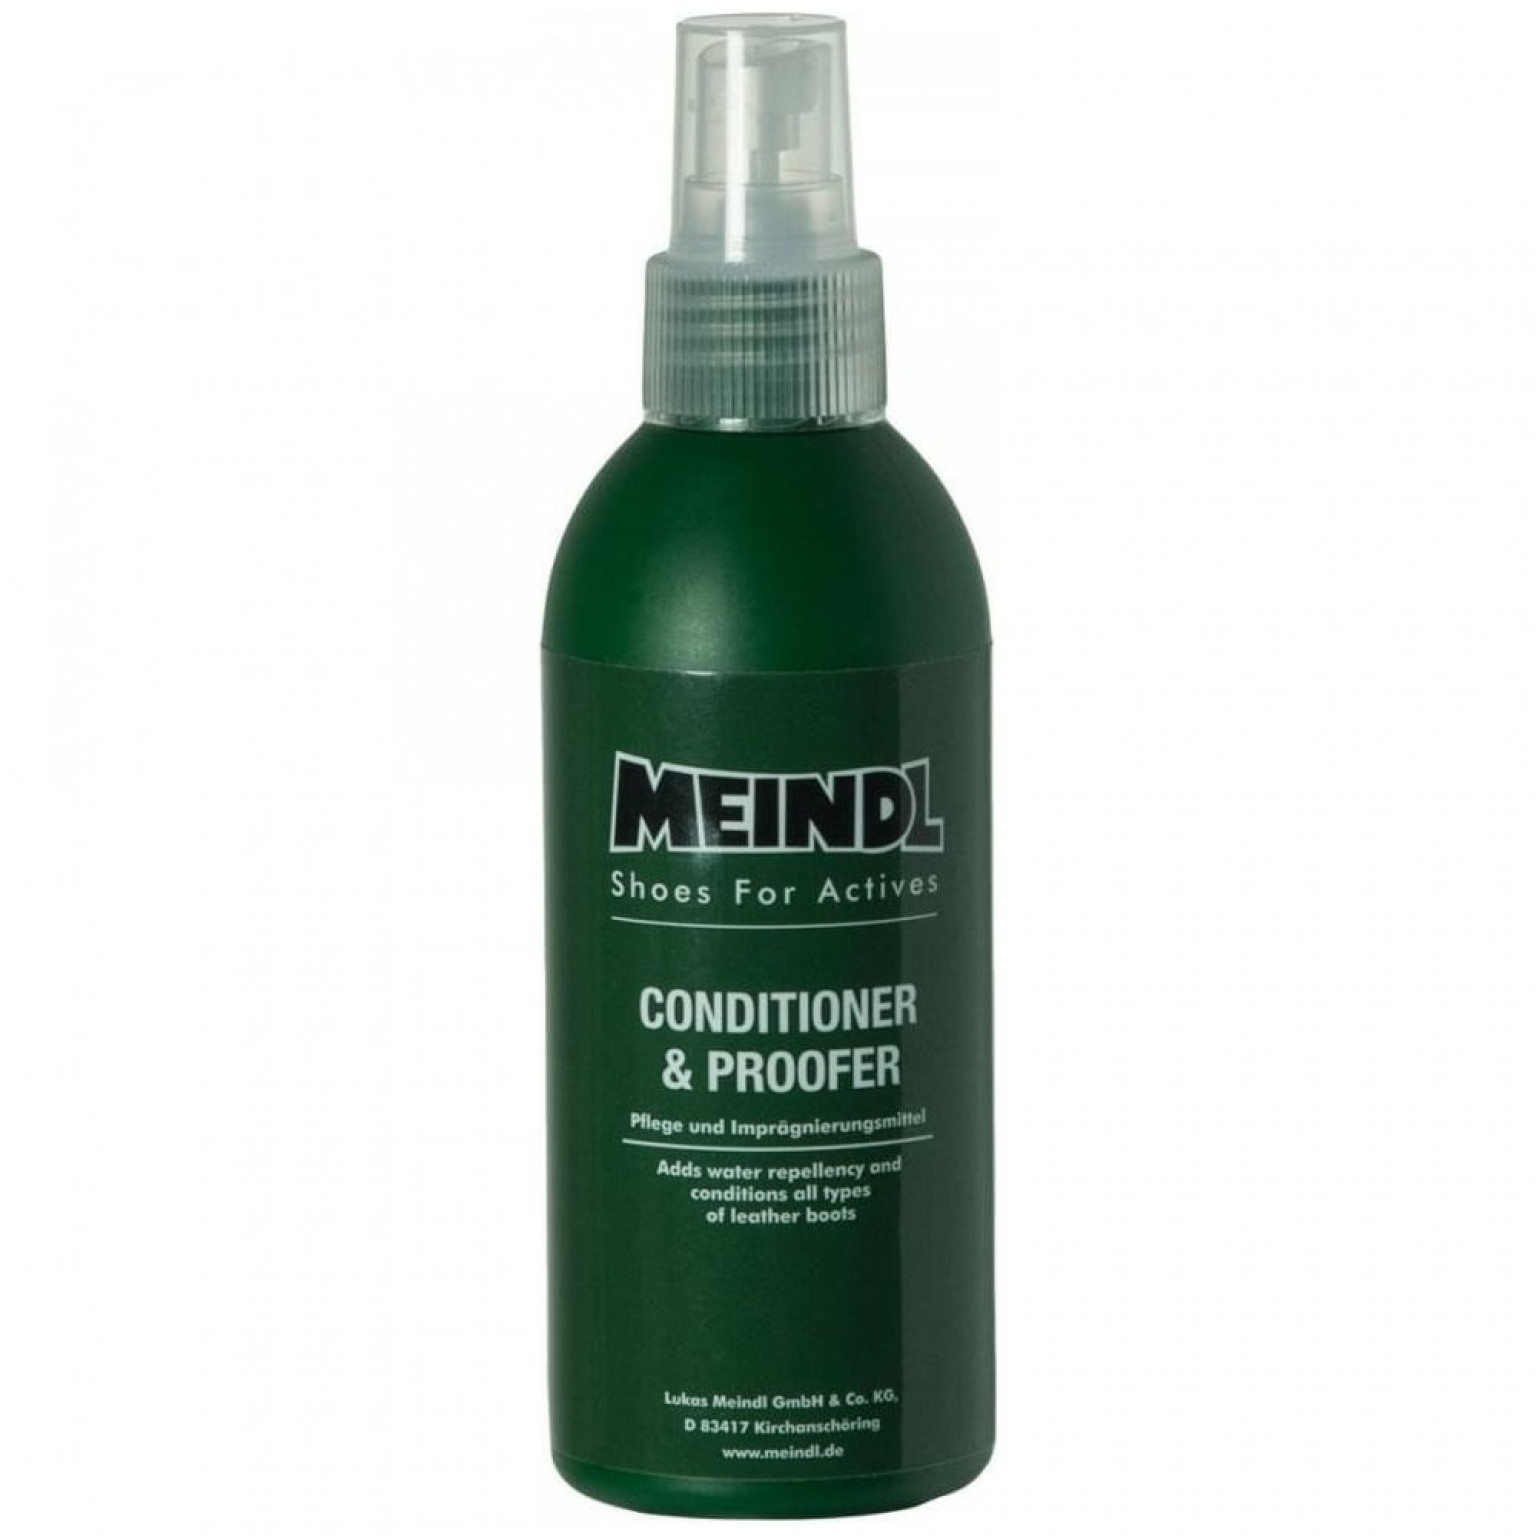 Meindl Conditioner/Proofer Any